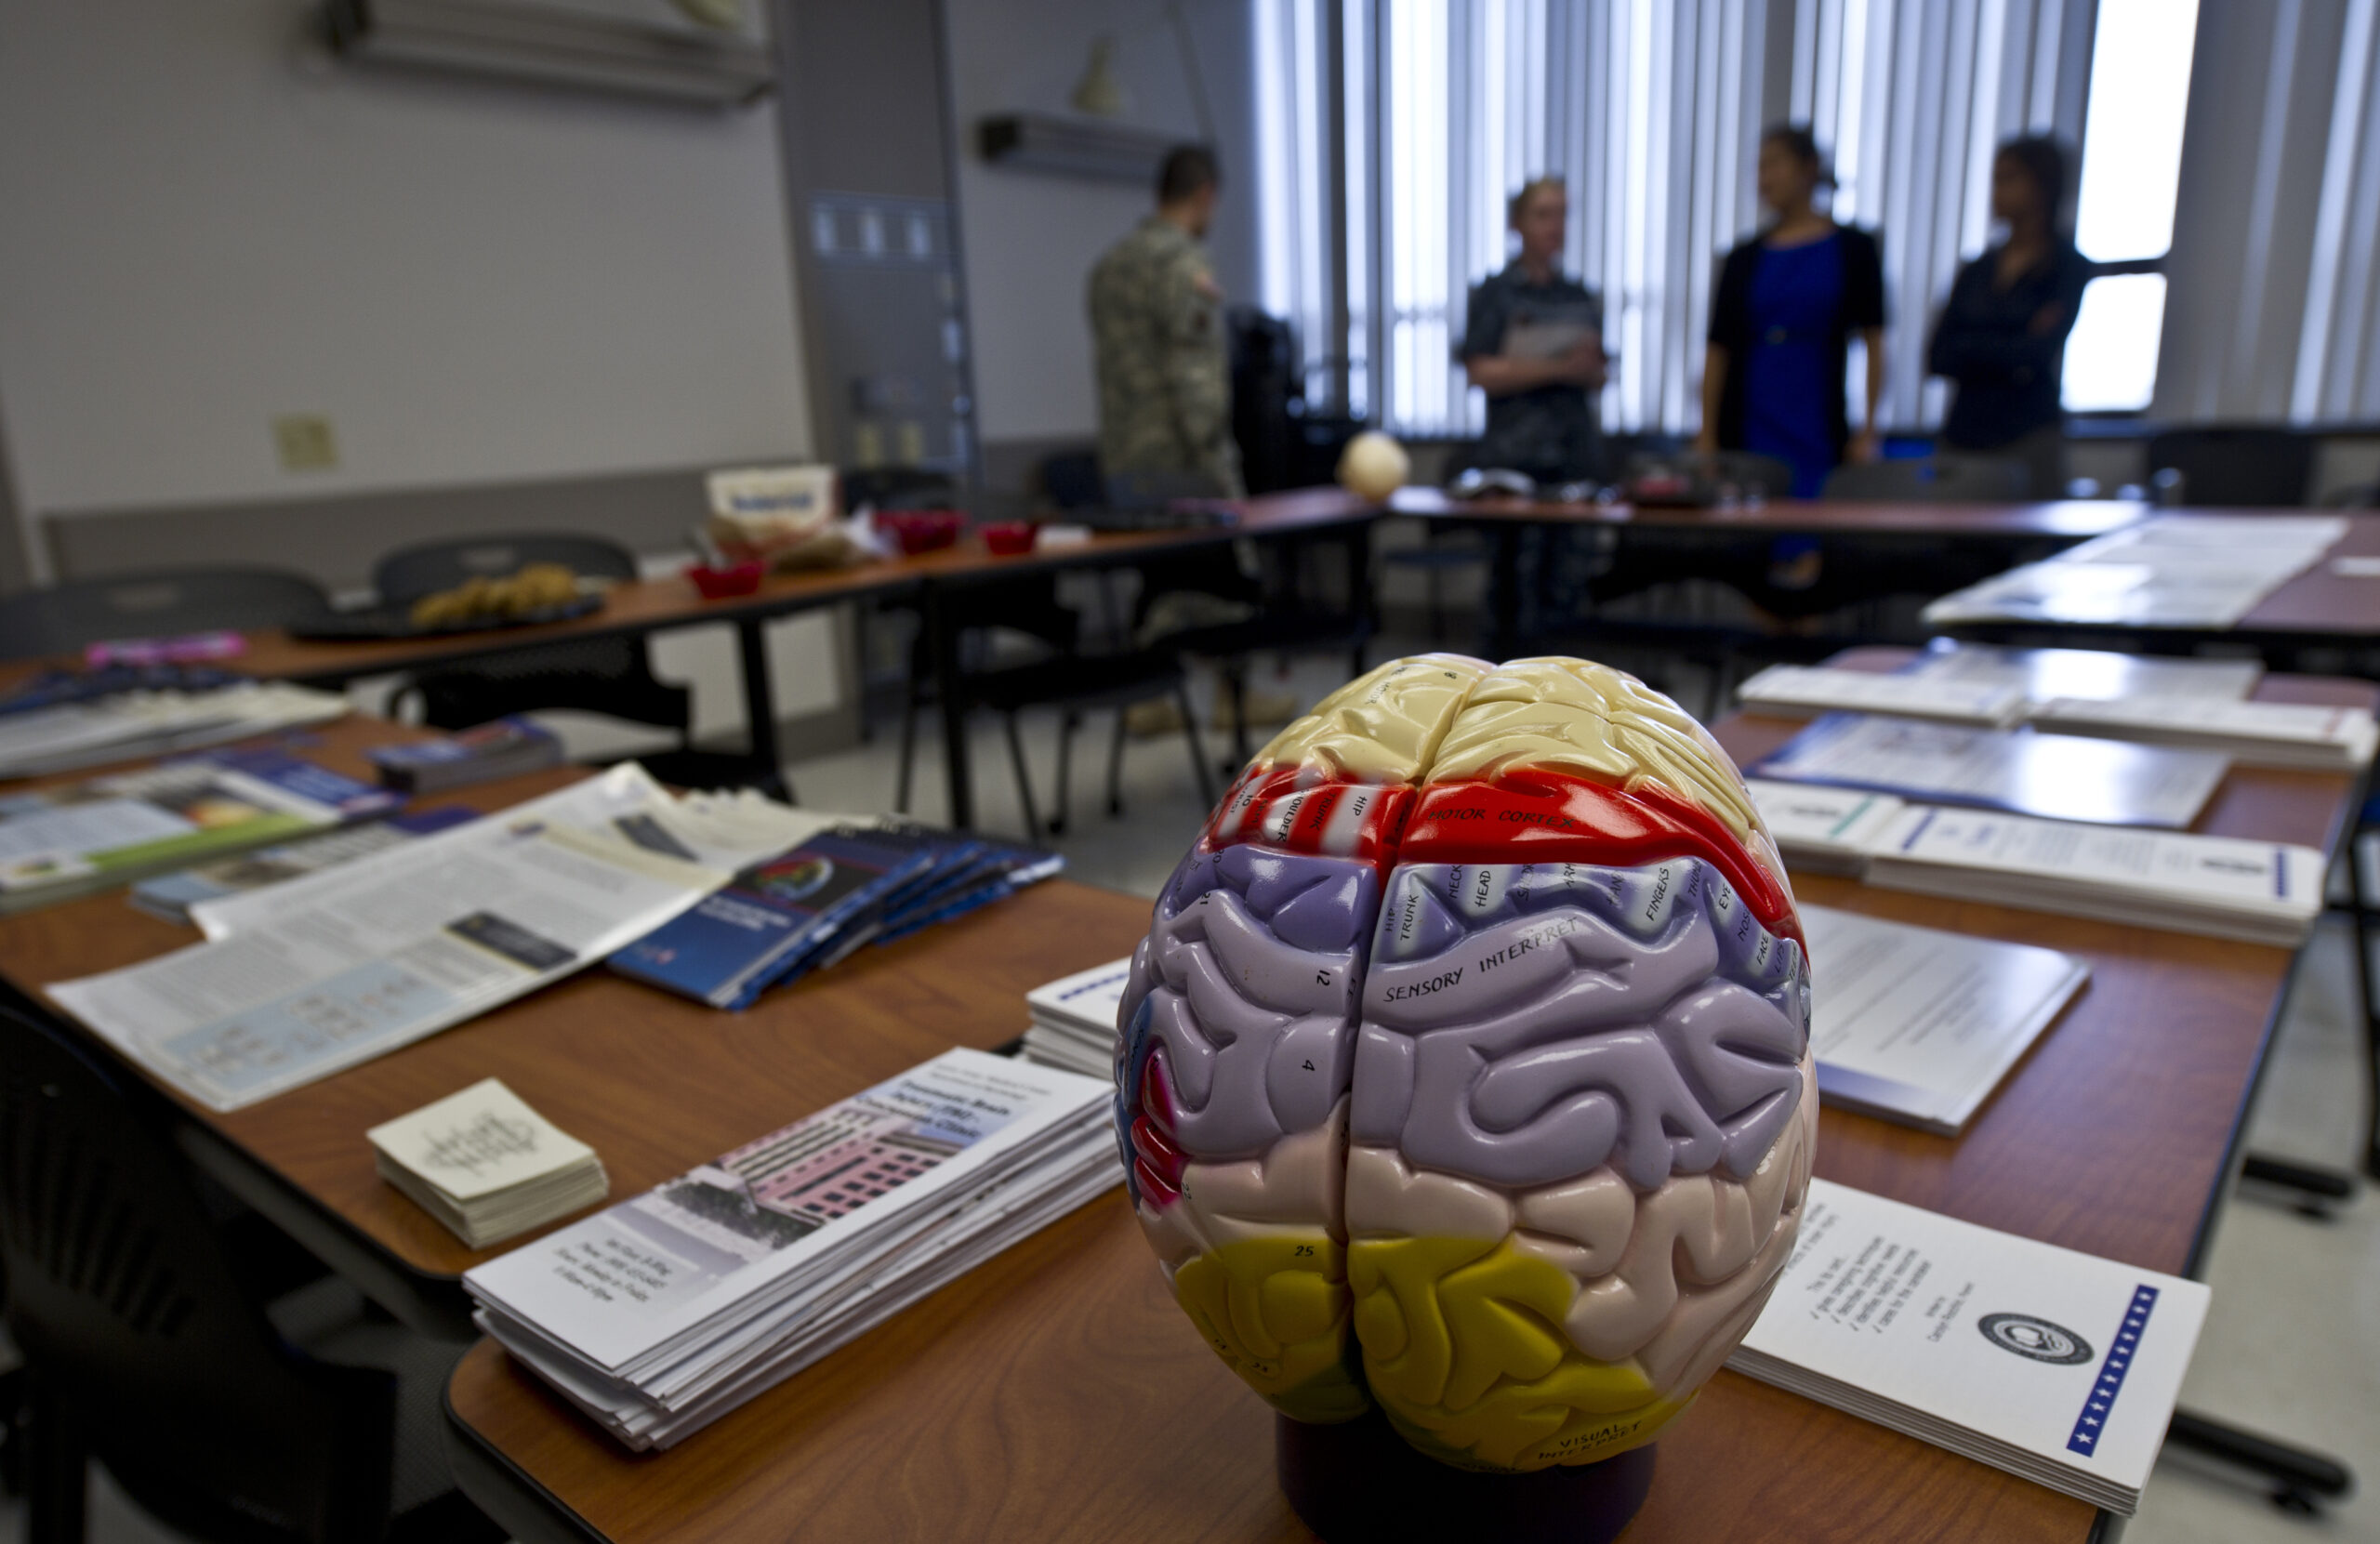 In an effort to help educate beneficiaries on what brain injury services and support are available, a Brain Injury Awareness Open House was held March 21, at Tripler Army Medical Center in Honolulu. The Pacific Regional Medical Command's Traumatic Brain Injury Program, is a comprehensive program which provides a continuum of integrated care and services for active duty service members and other beneficiaries with TBI. (Department of Defense photo by U.S. Air Force Tech. Sgt. Michael R. Holzworth/Released)